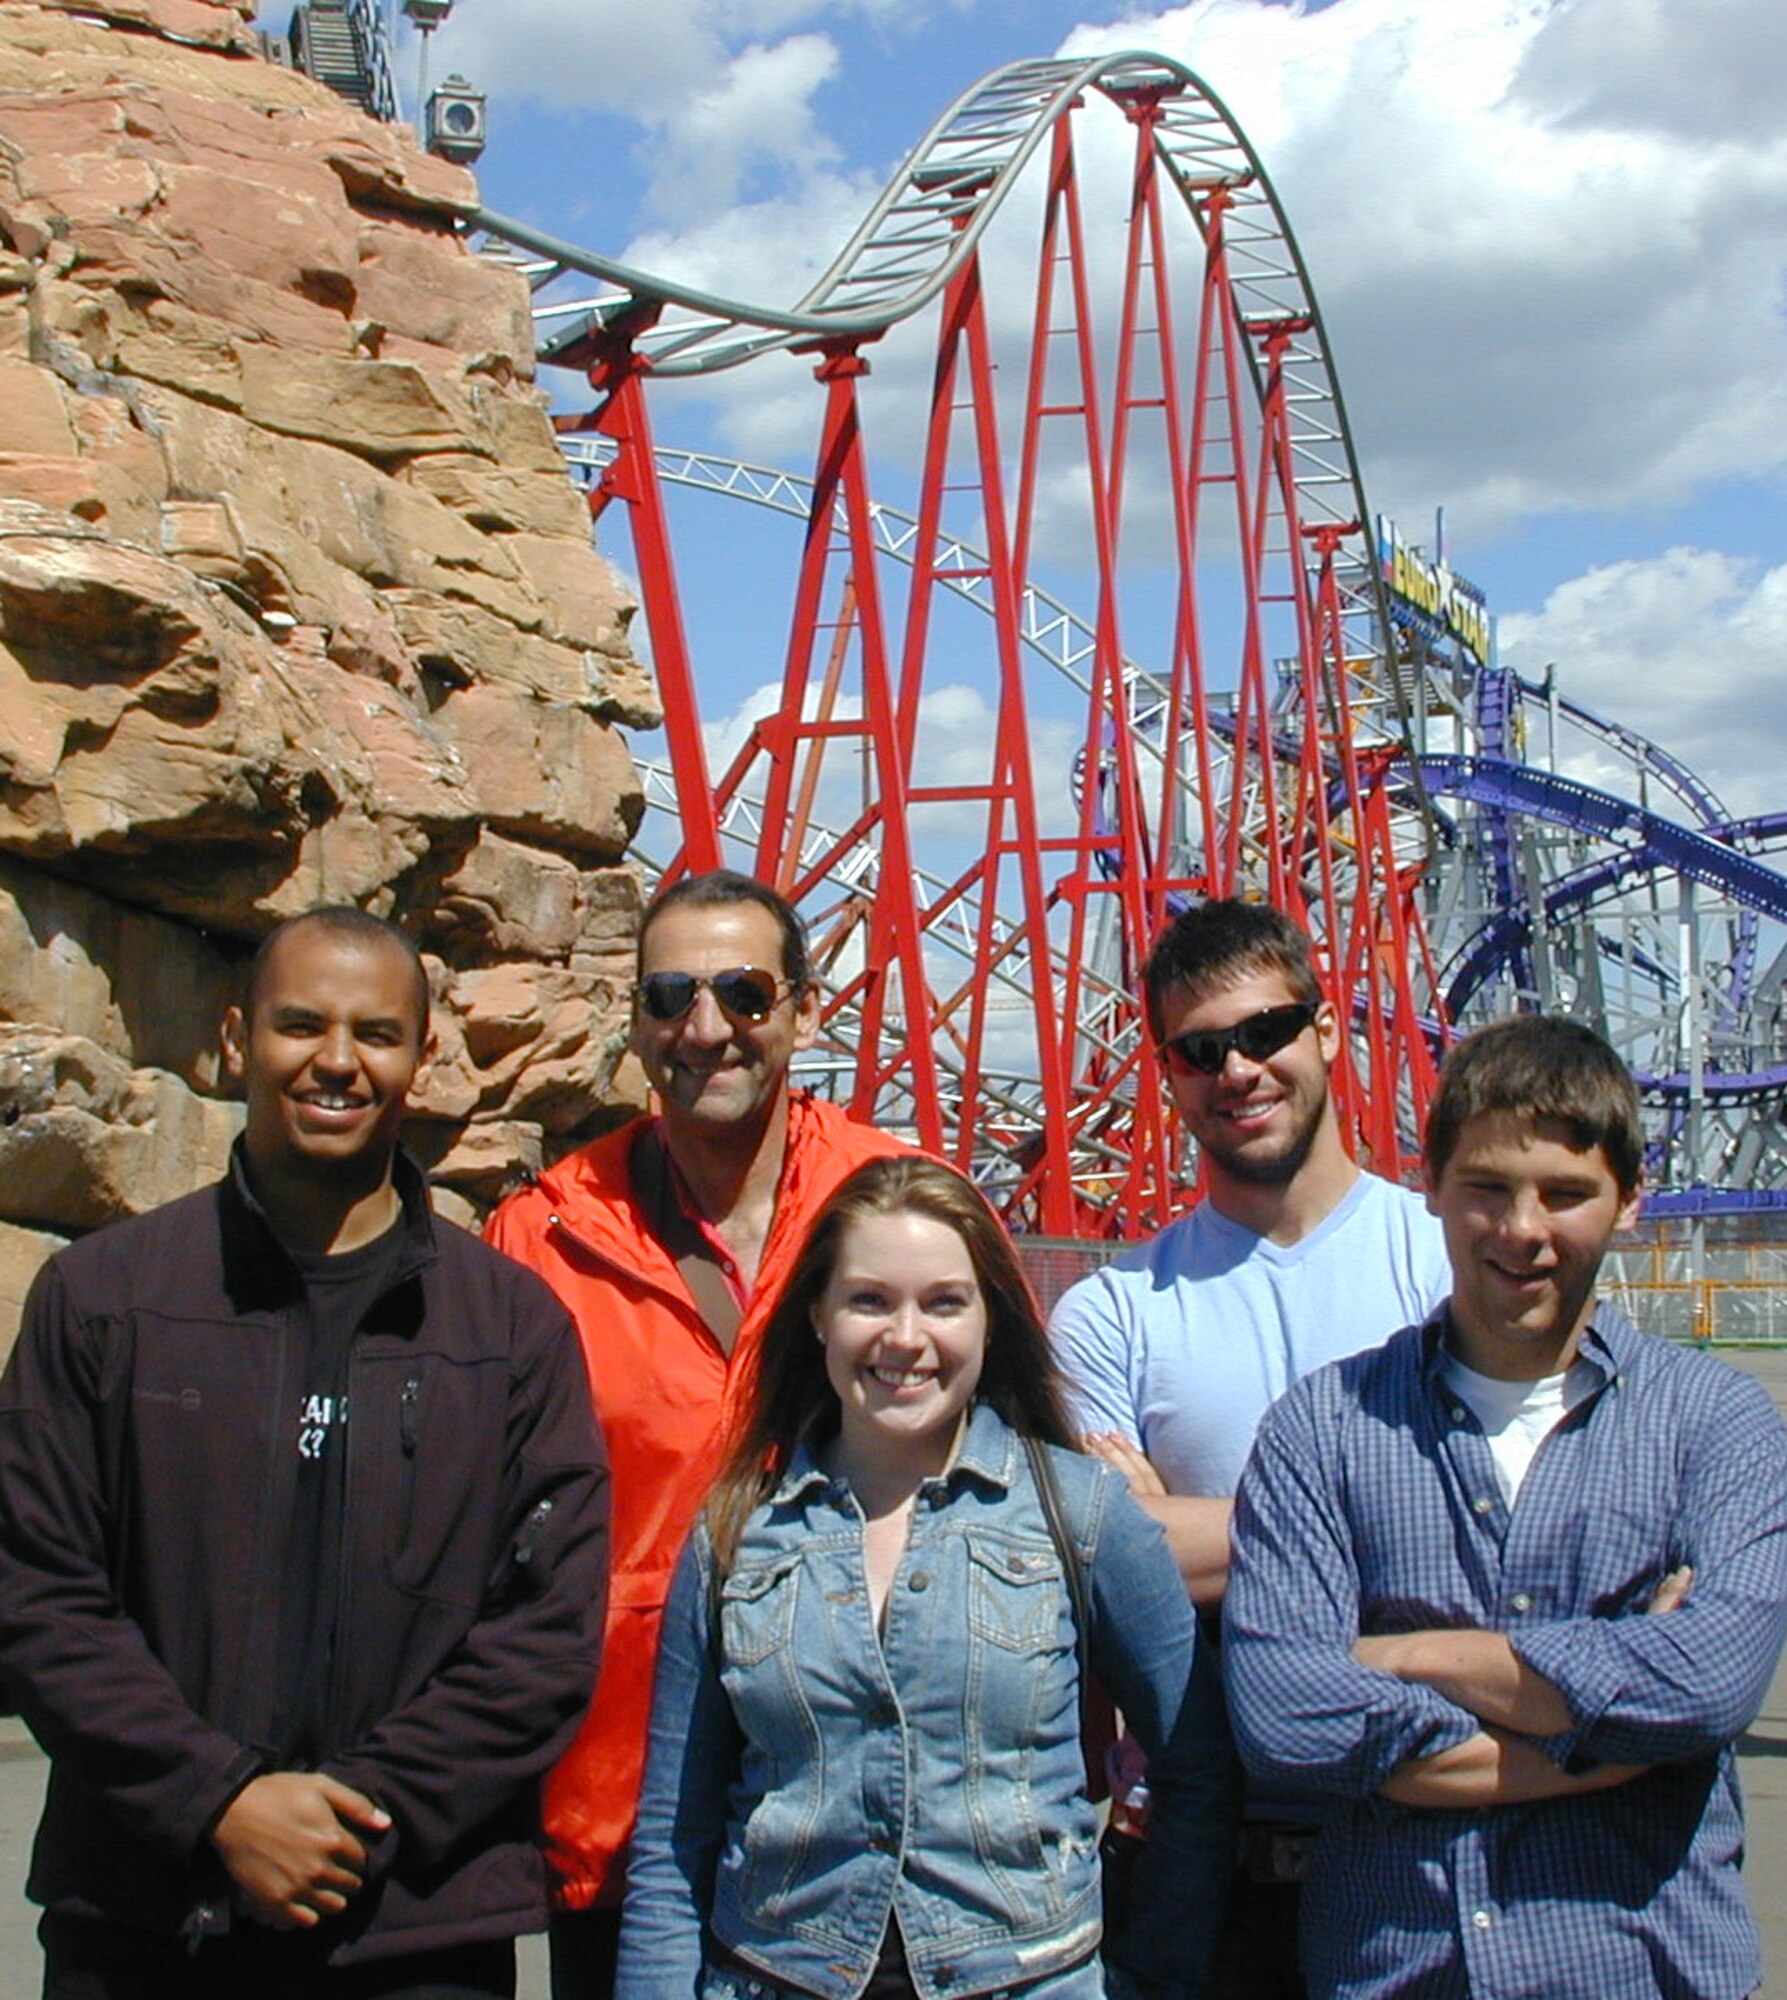 From left to right: Cadet 2nd Class Chad Everett, Dr. George Mastrroianni, Cadet 2nd Class Andrea Brichacek and Cadets 3rd Class Cory Ostrowski and Andrew Cavallo visit Gorky Park June 13 during a cultural immersion trip to Russia. The travelers spent three weeks in Russia and visited Moscow, St. Petersburg and Novogrod. (U.S. Air Force photo)